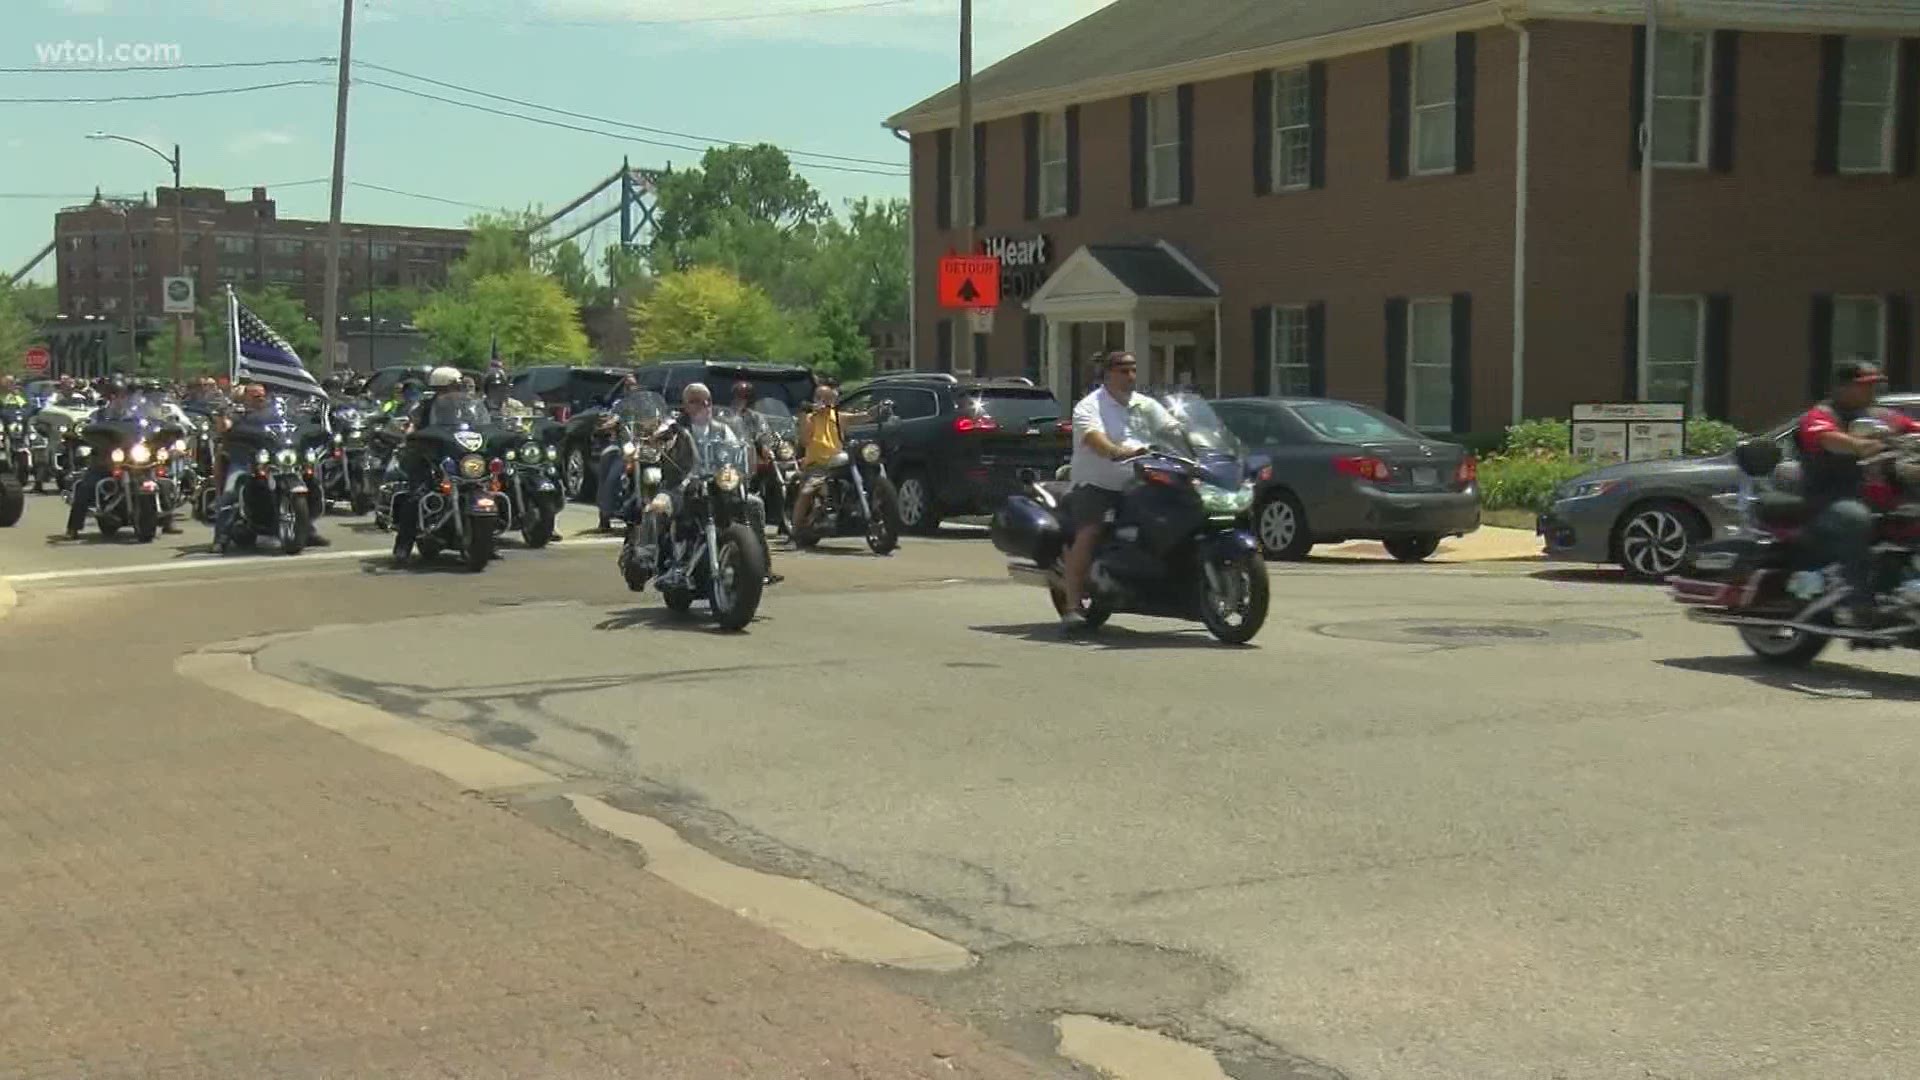 About 500 motorcyclists rode from S. Superior St. to the Safety Building where Sheriff John Tharp and Chief George Kral spoke to a large crowd.